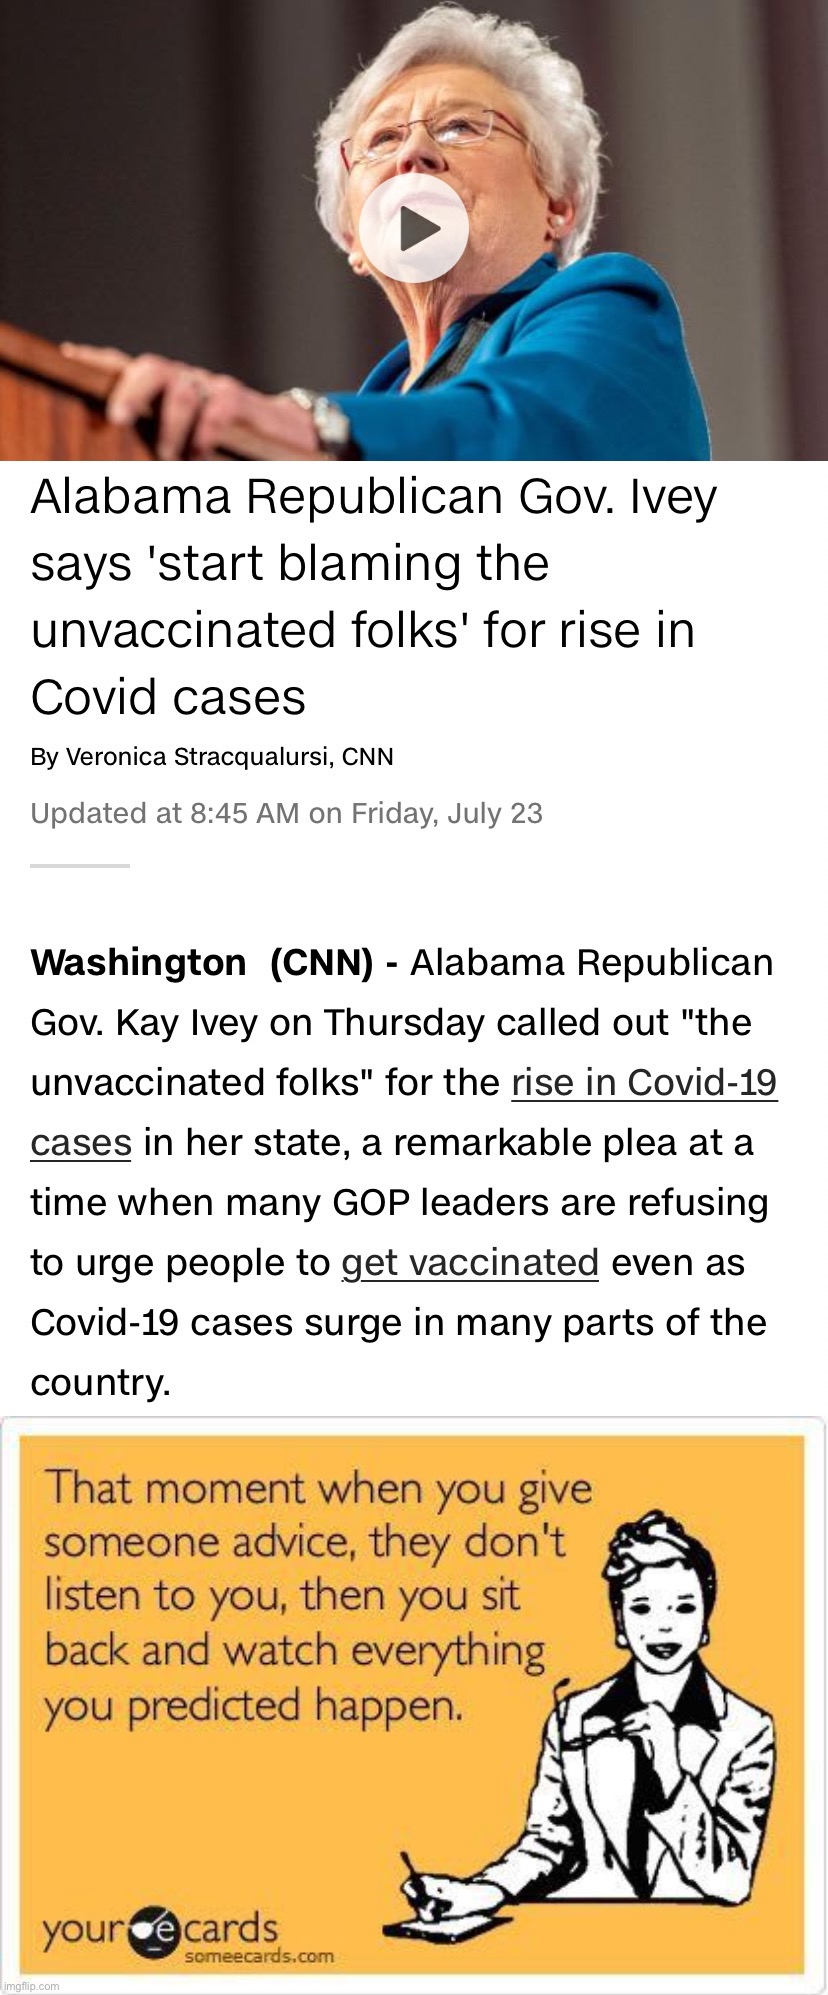 Happens a lot around here | image tagged in alabama republican governor antivaxxers,i told you so | made w/ Imgflip meme maker